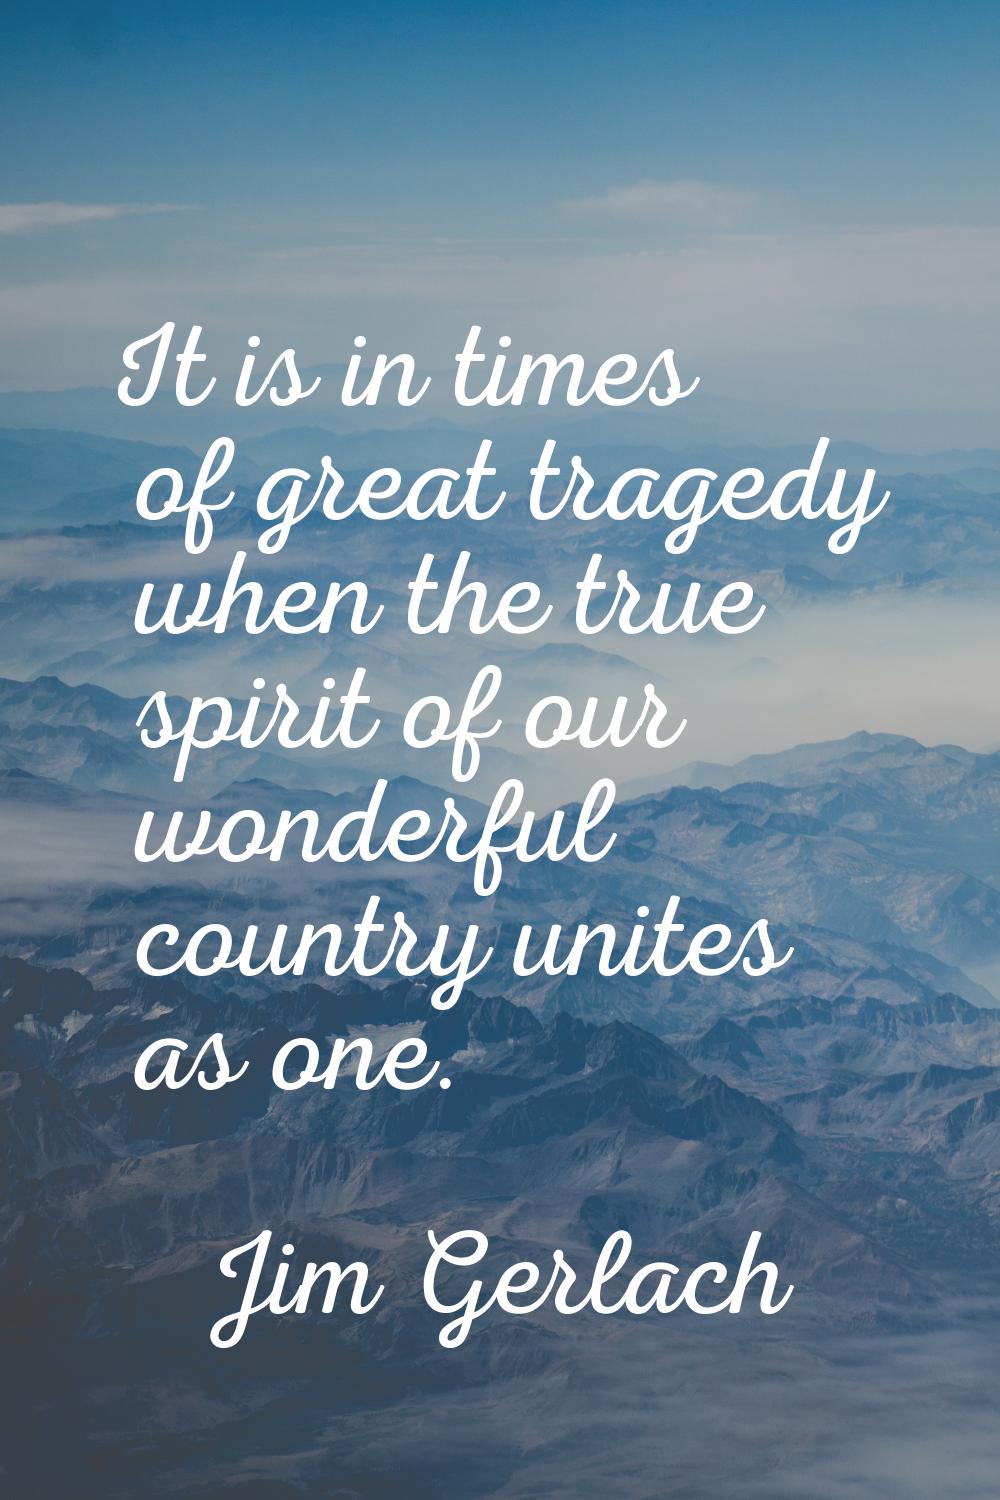 It is in times of great tragedy when the true spirit of our wonderful country unites as one.